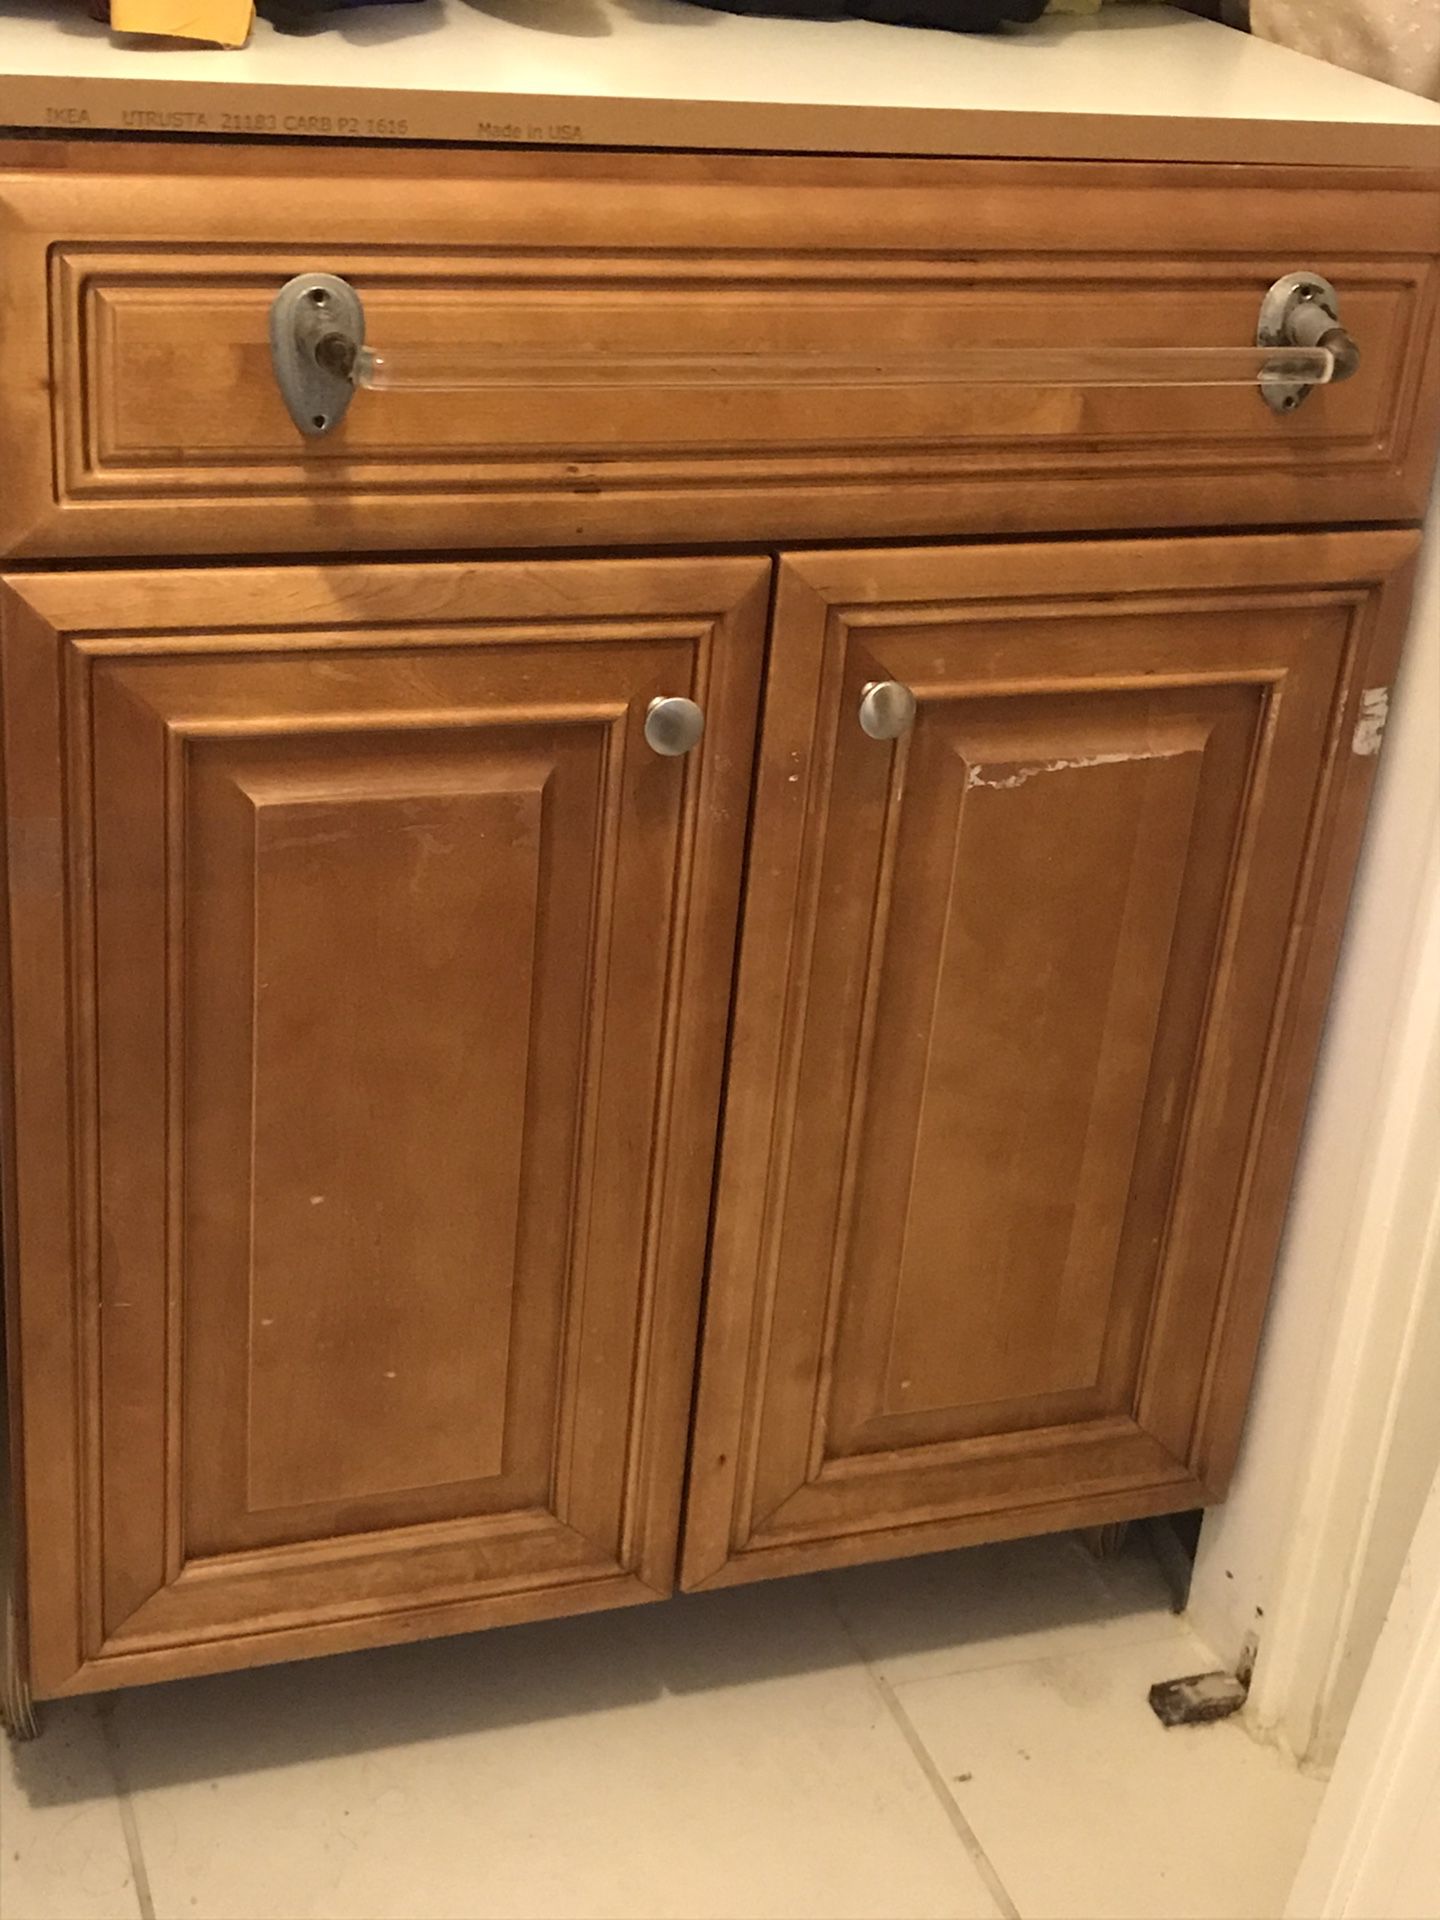 Used Kitchen cabinet. 27” wide x 34” tall.